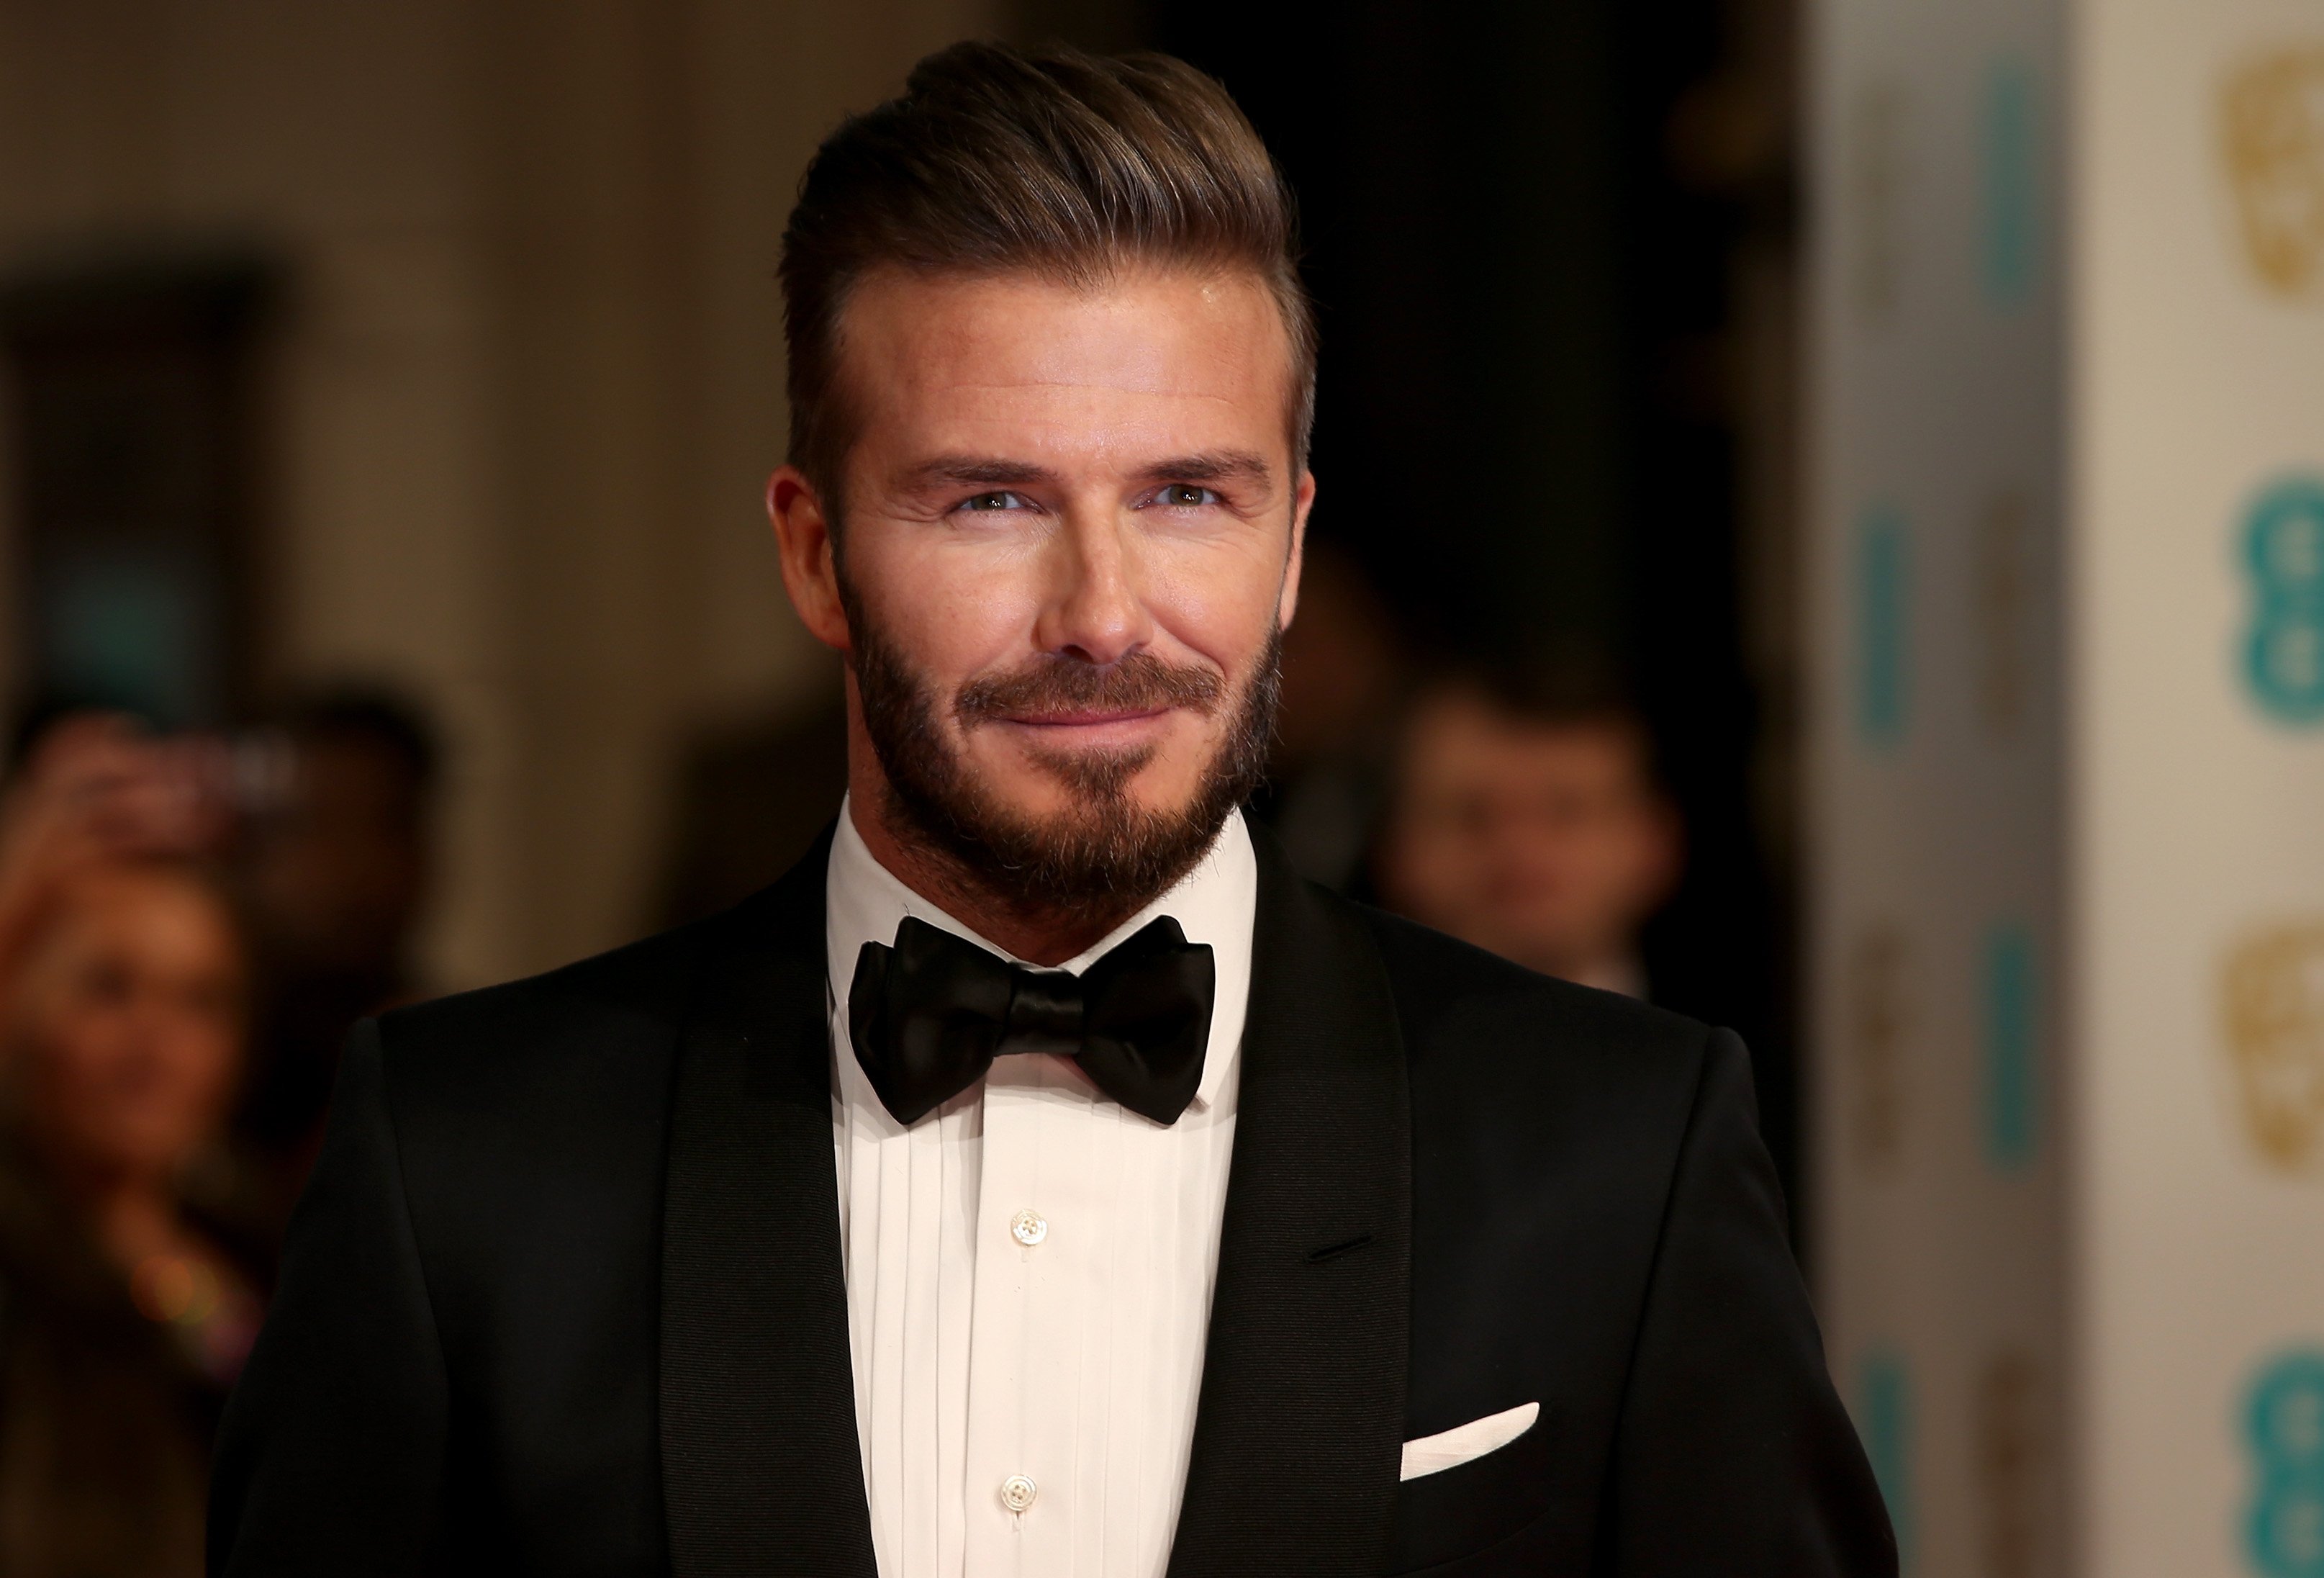 David Beckham attends the EE British Academy Film Awards at The Royal Opera House on February 8, 2015 in London, England | Photo: Getty Images